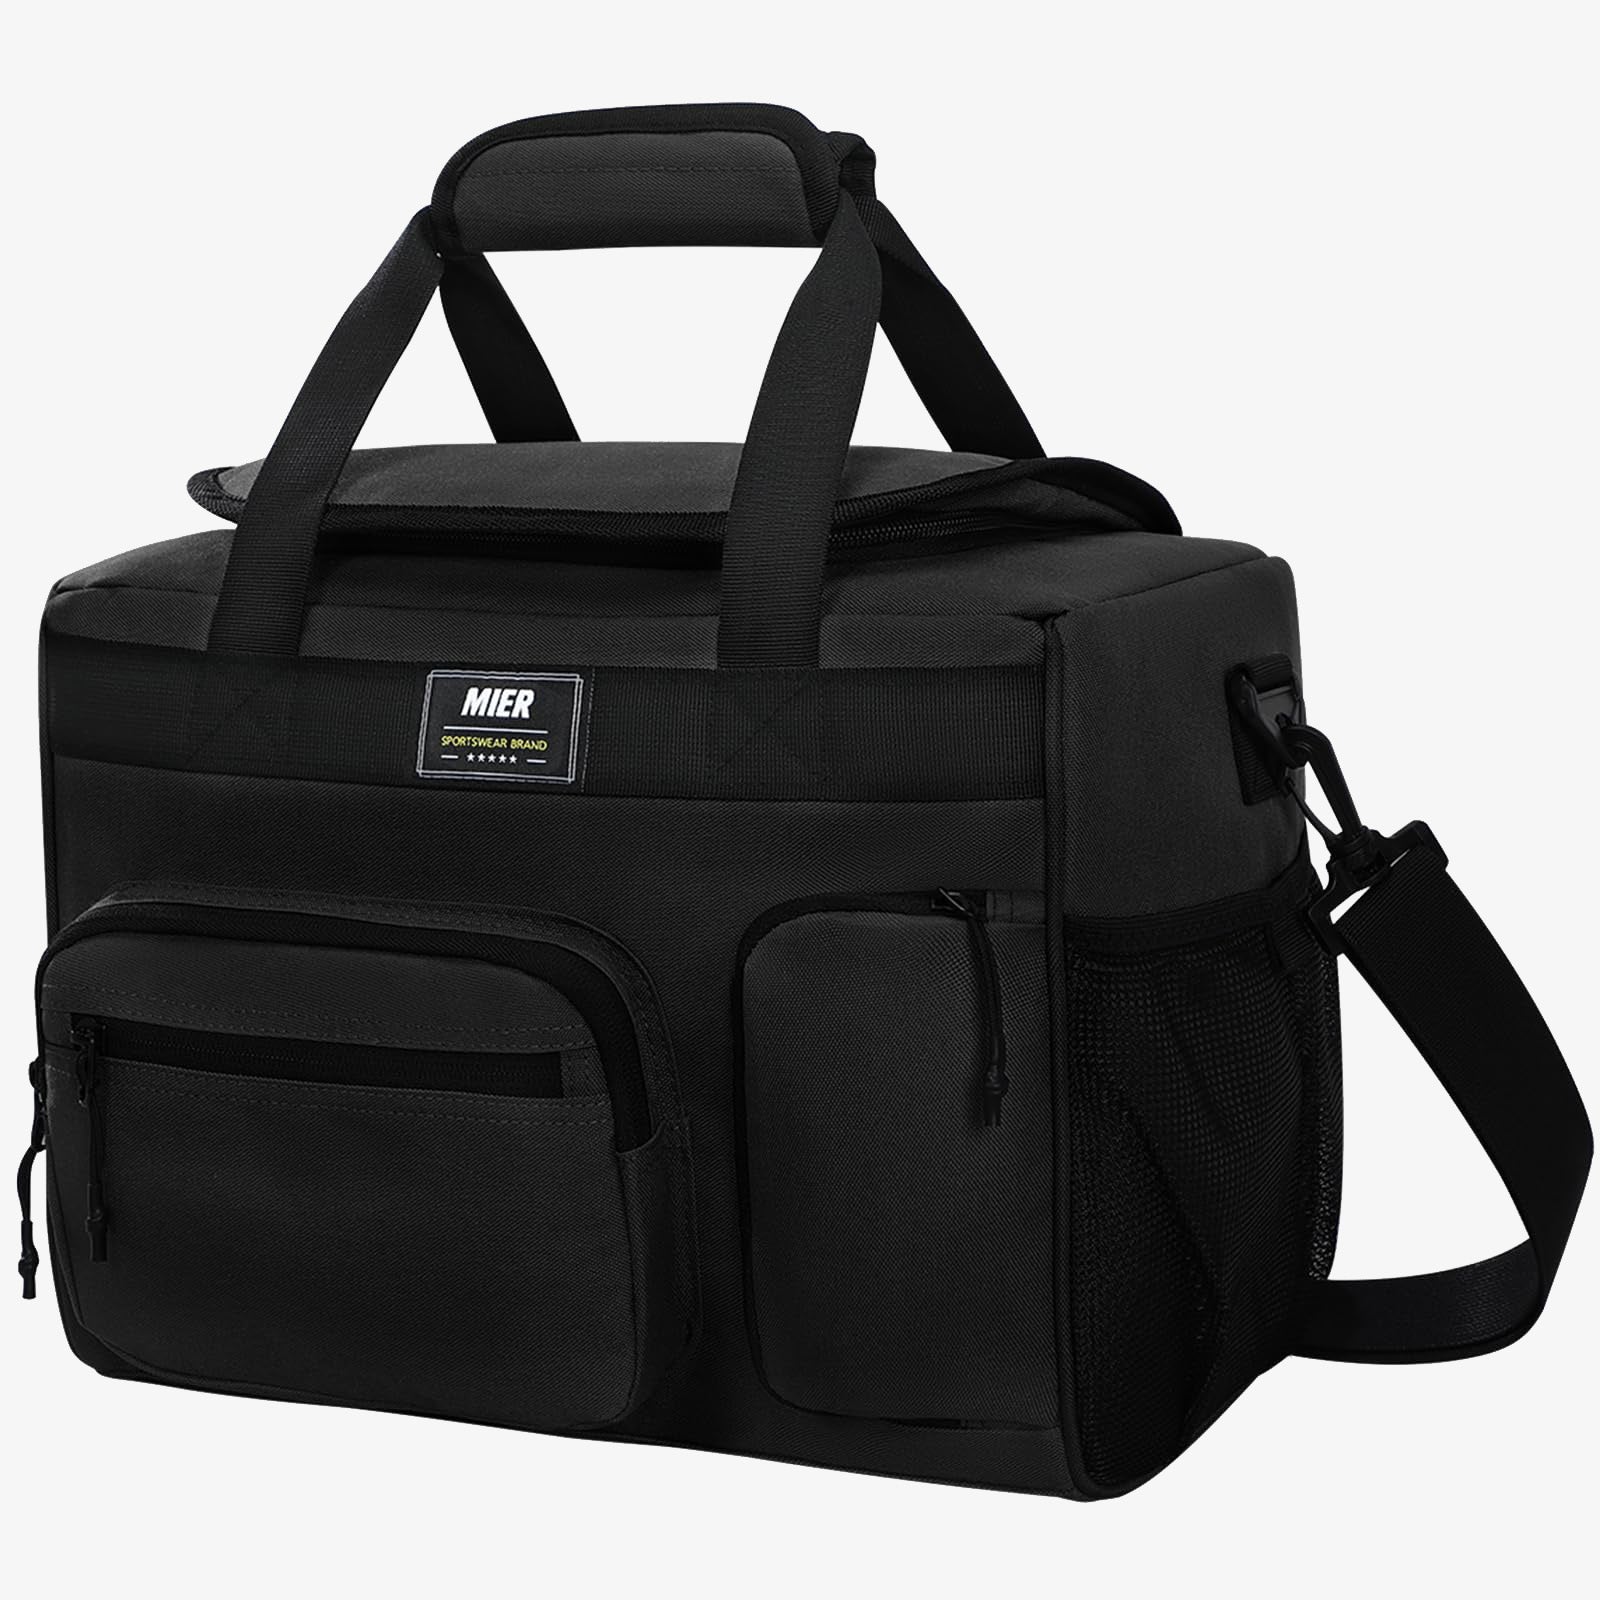 Insulated Soft Cooler Lunch Bag for Men Women, 30 Can